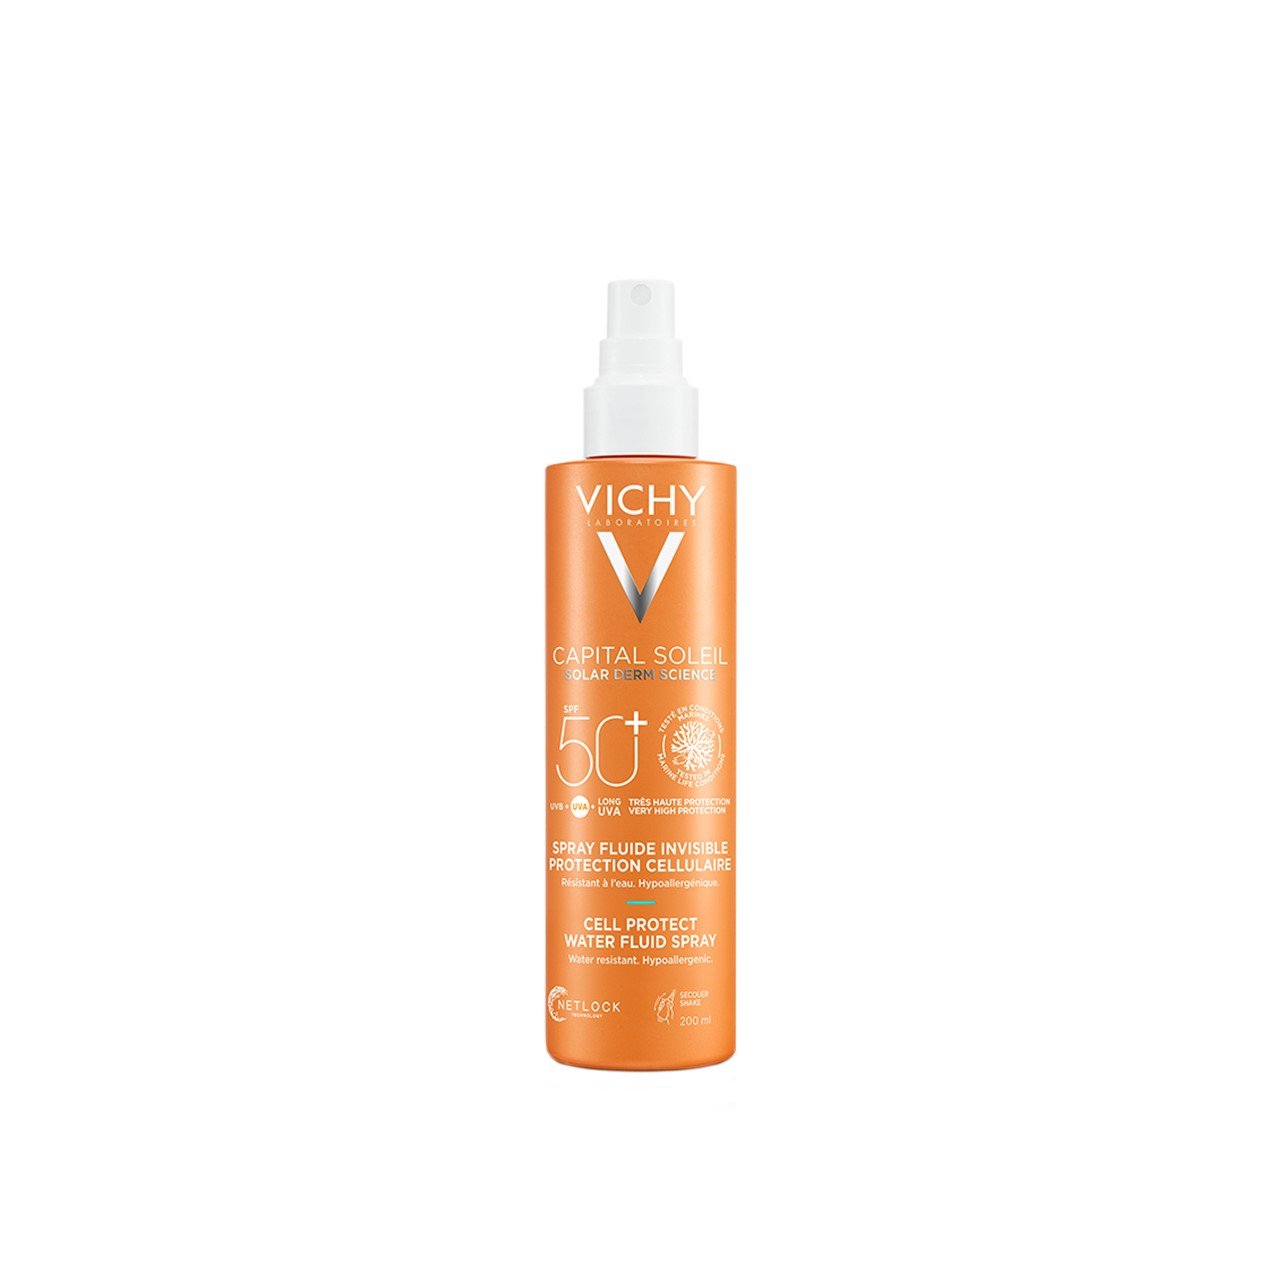 Vichy Capital Soleil Cell Protect Water Fluid Spray SPF50+ 200ml